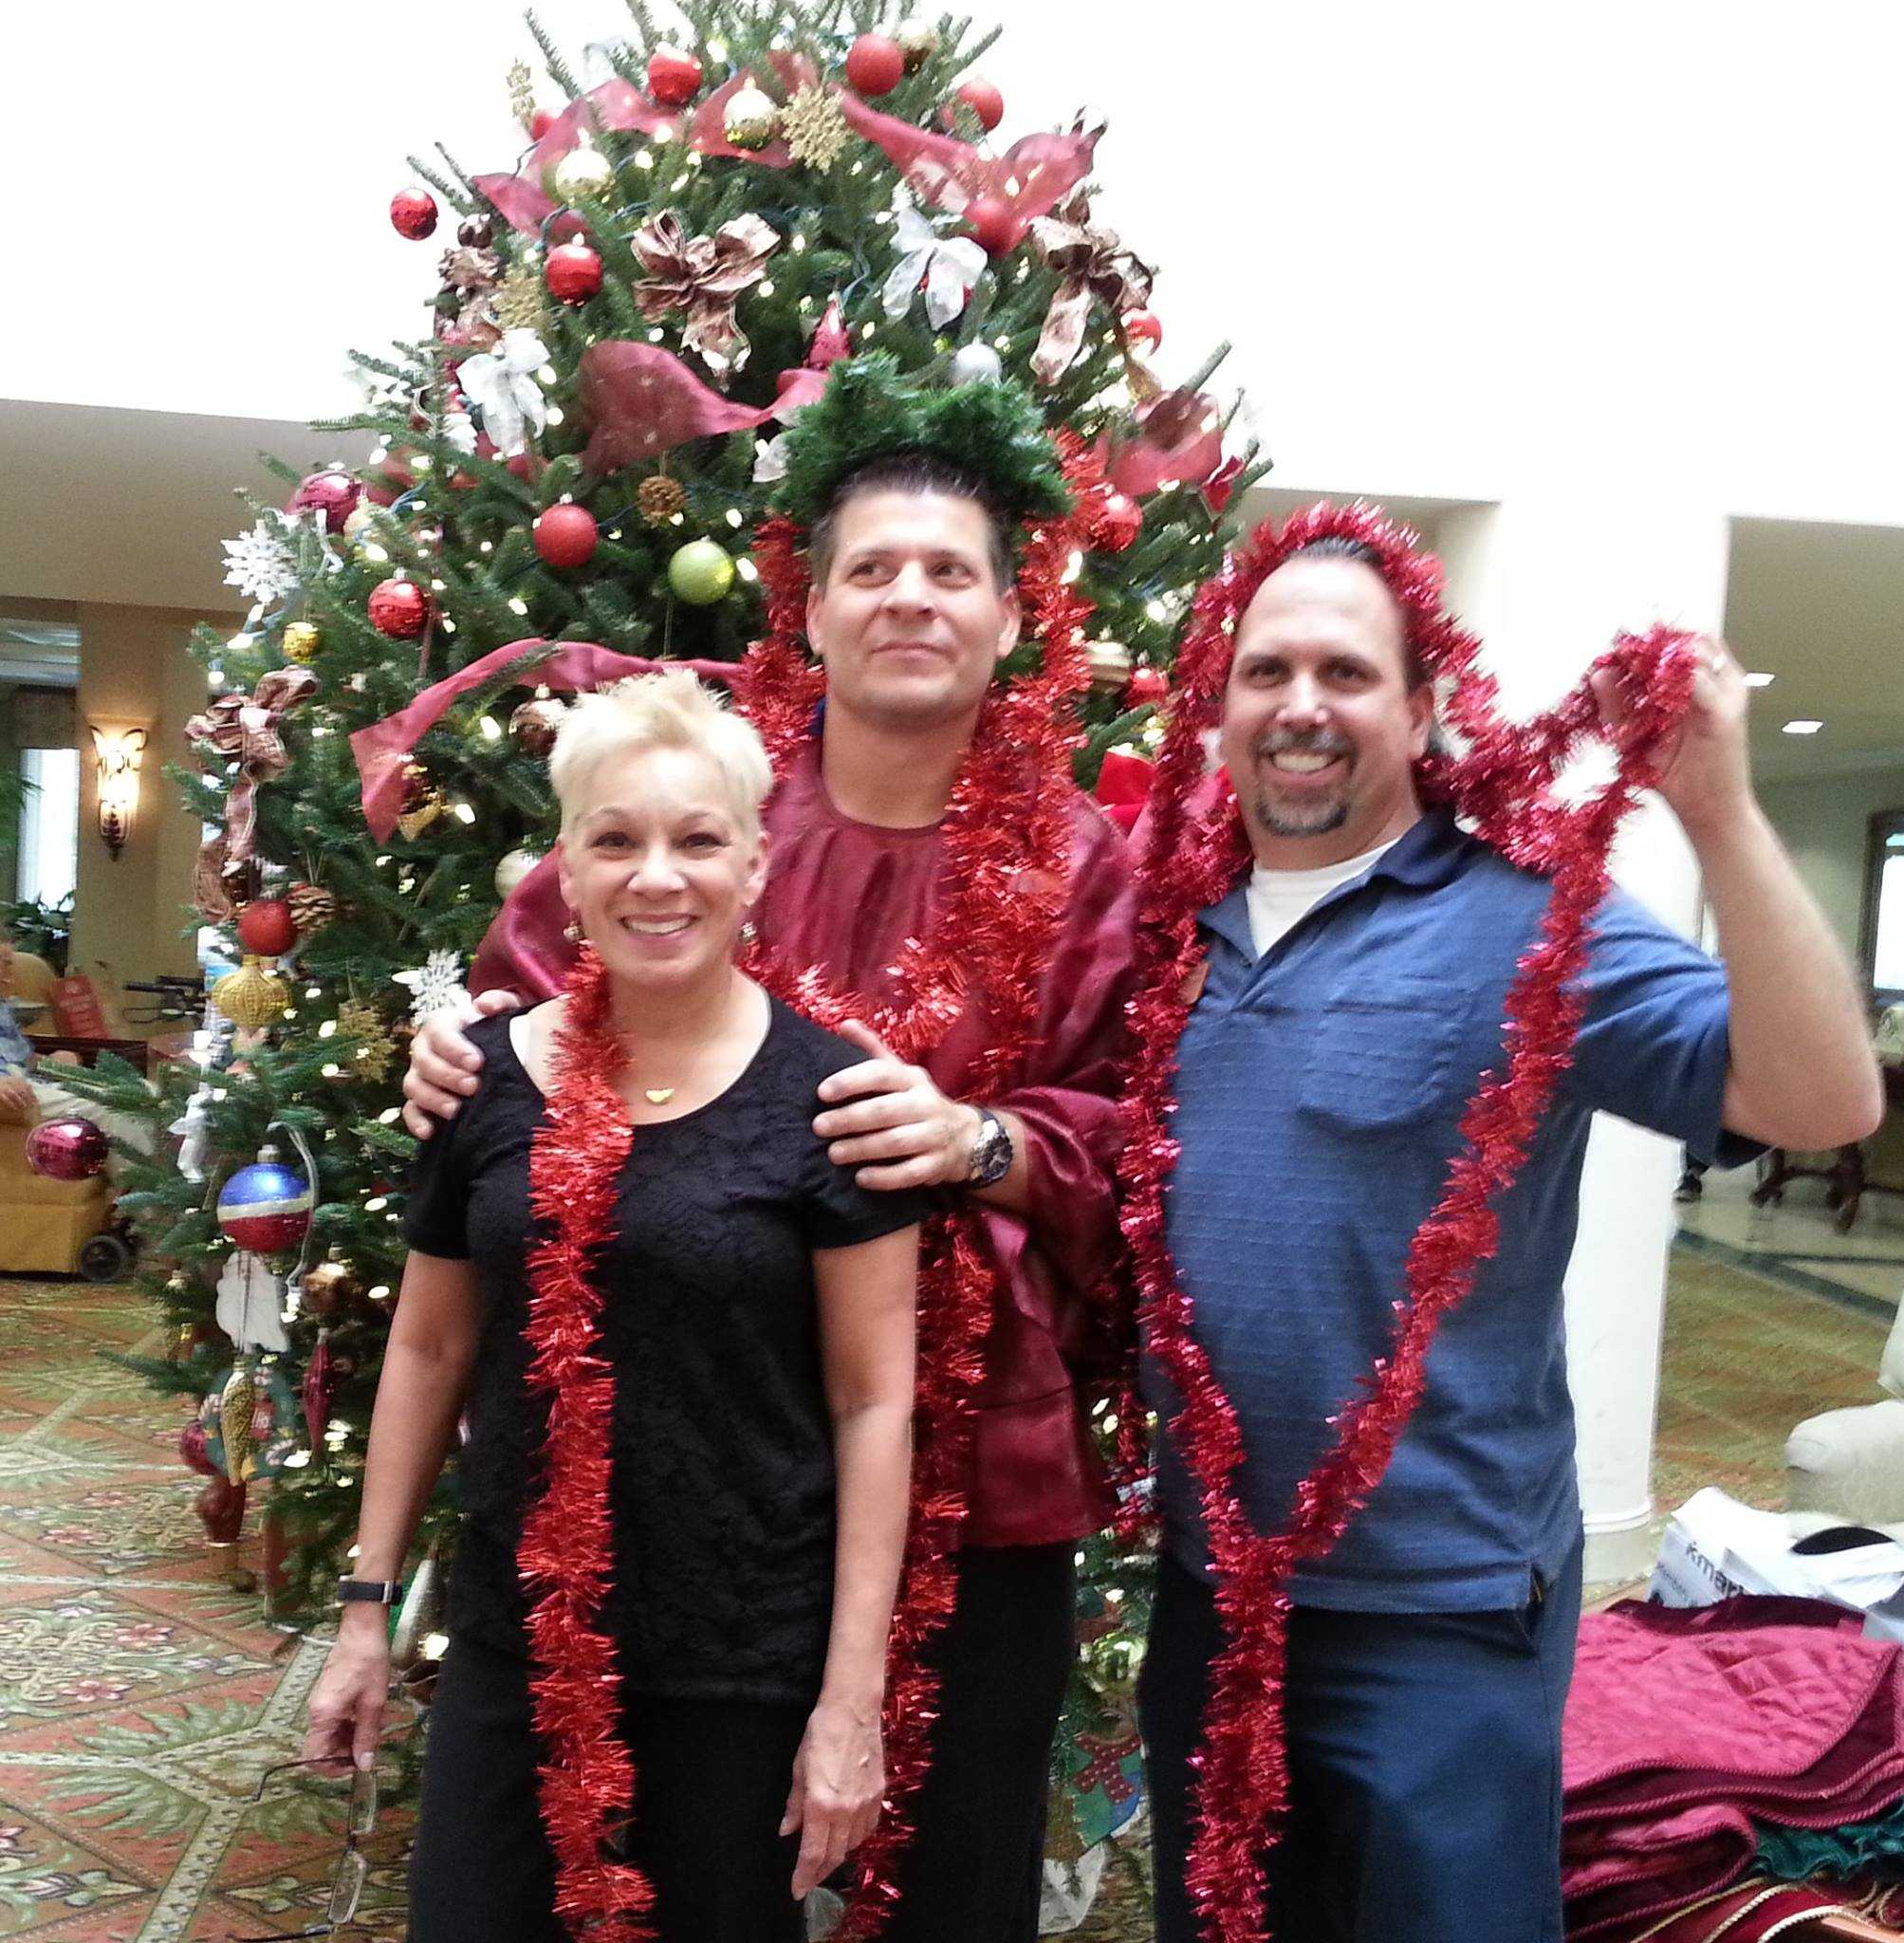 Staff at The Atrium in Boca Raton, Florida, got in the holiday spirit early this year and decorated themselves in addition the tree--and themselves!